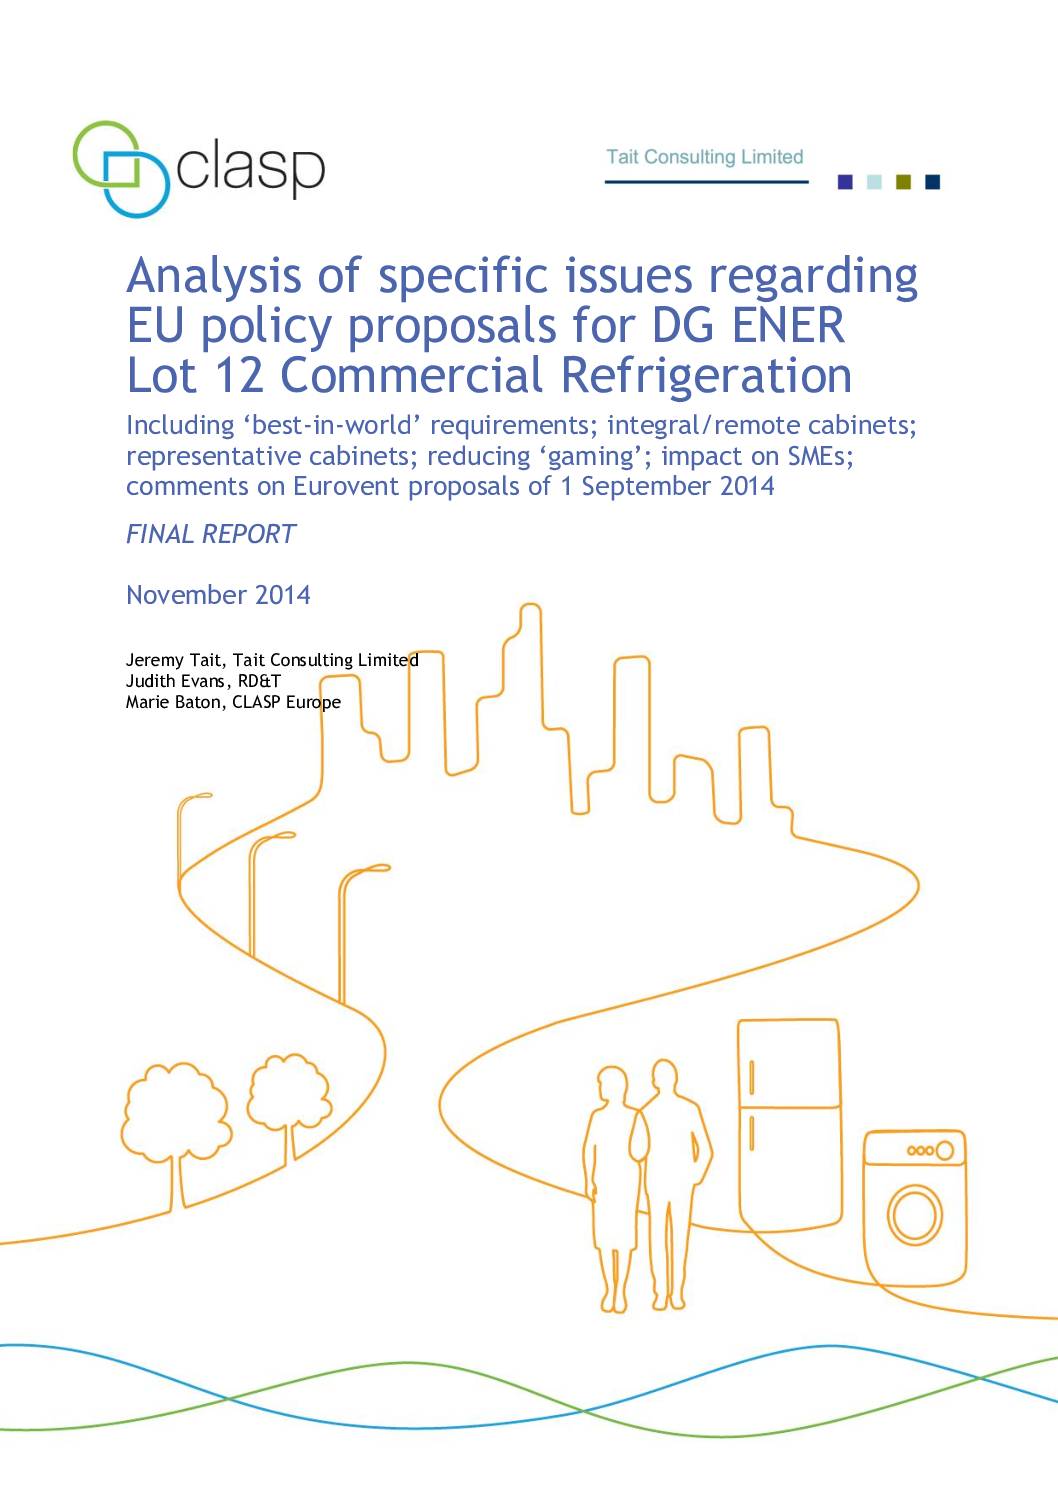 Analysis of specific issues regarding EU policy proposals for DG ENER Lot 12 Commercial Refrigeration